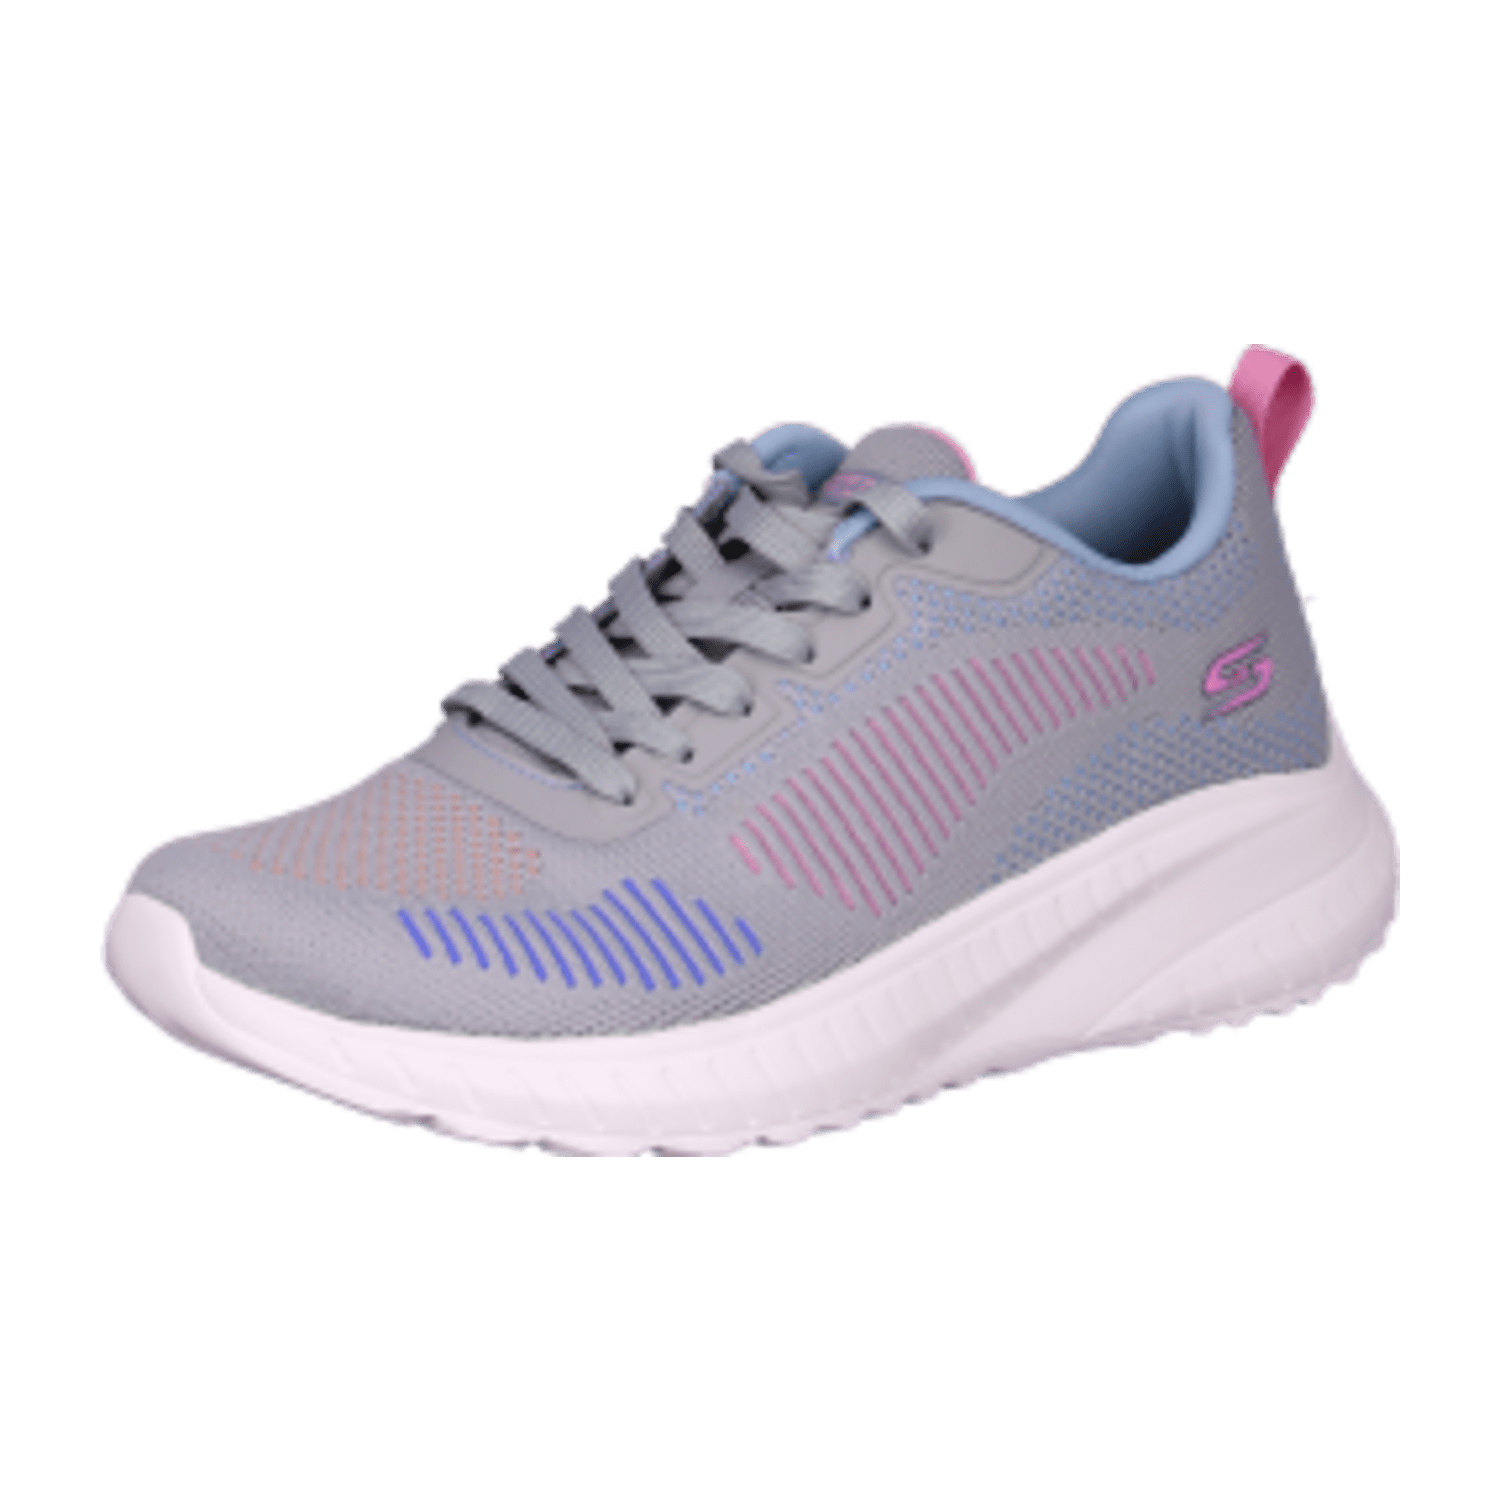 Skechers BOBS SQUAD CHAOS - COLOR CRUSH